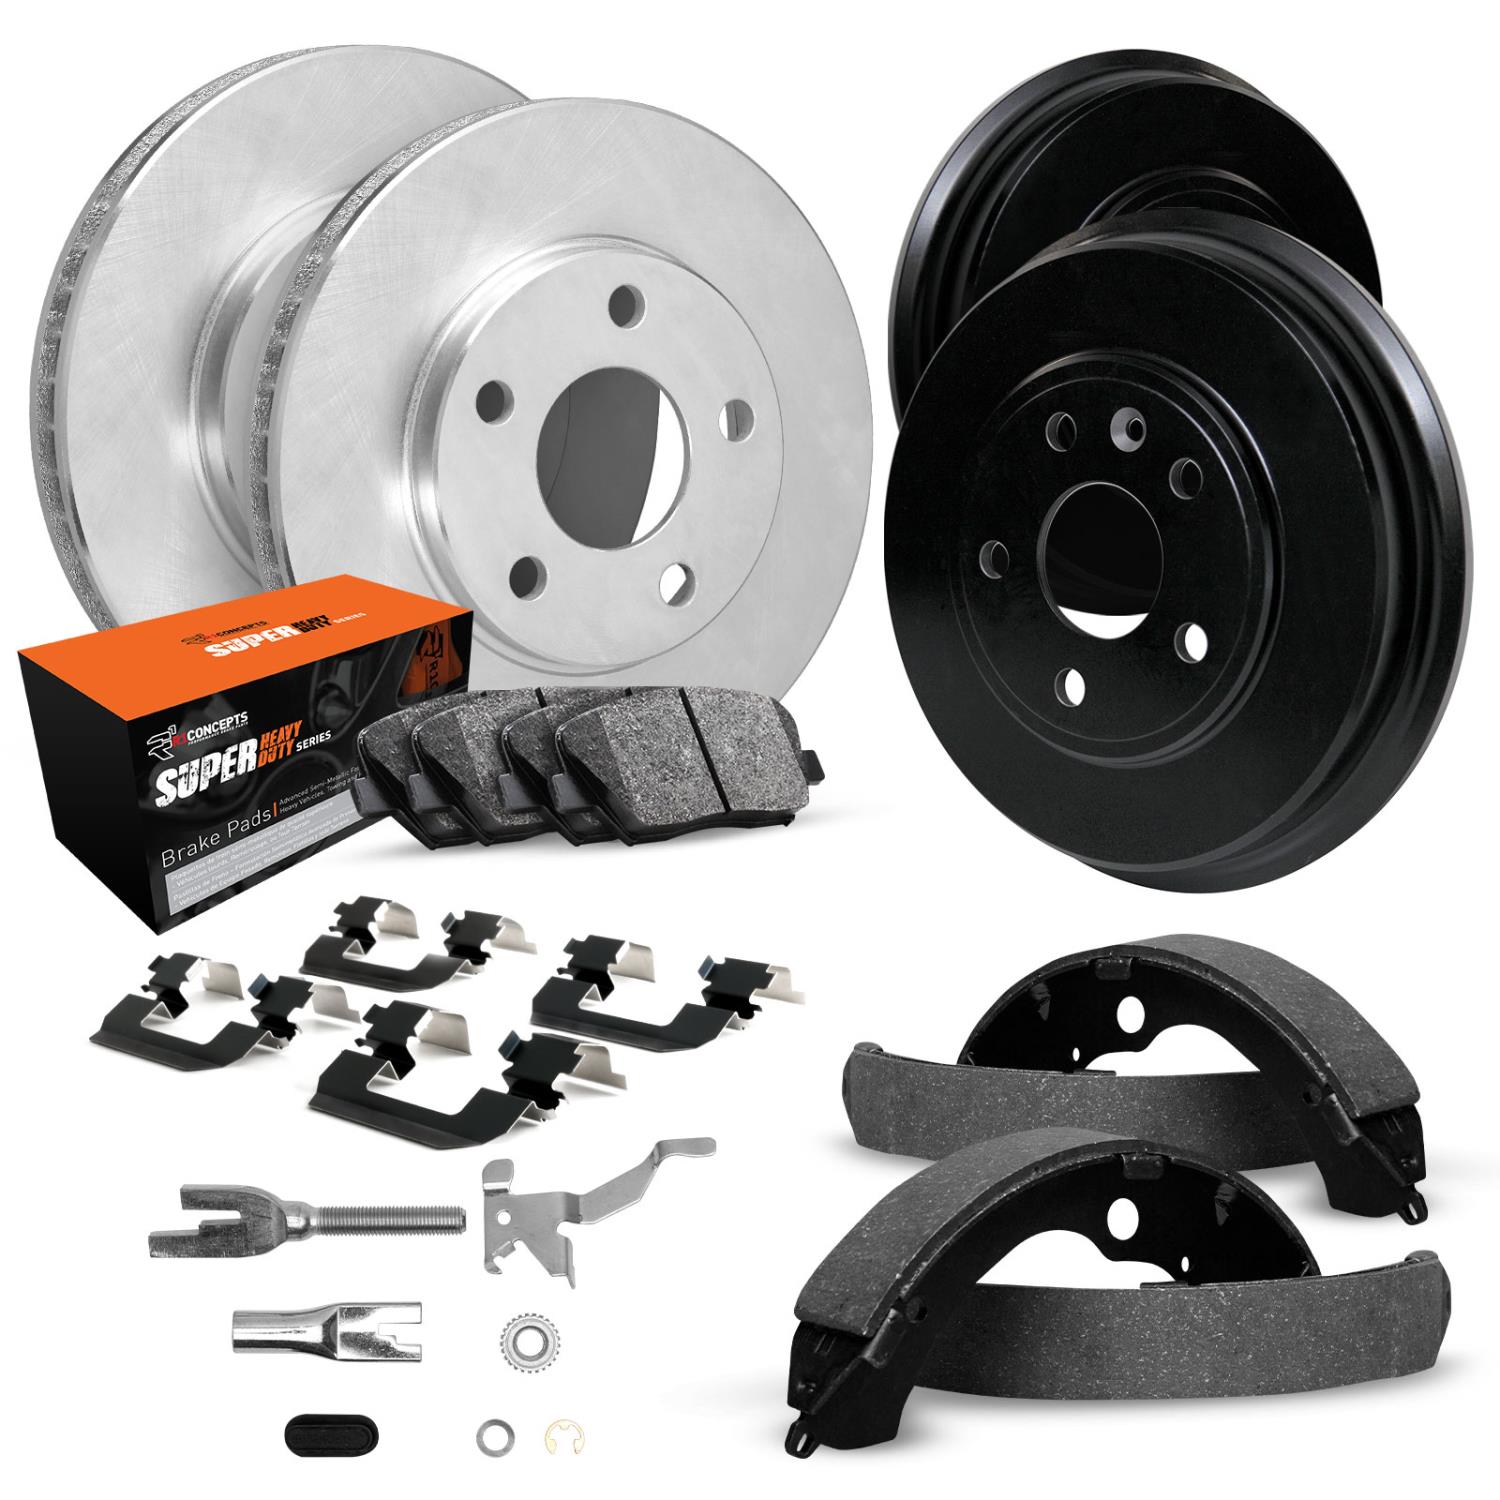 E-Line Blank Brake Rotor & Drum Set w/Super-Duty Pads, Shoes, Hardware, & Adjusters, 1976-1985 Ford/Lincoln/Mercury/Mazda